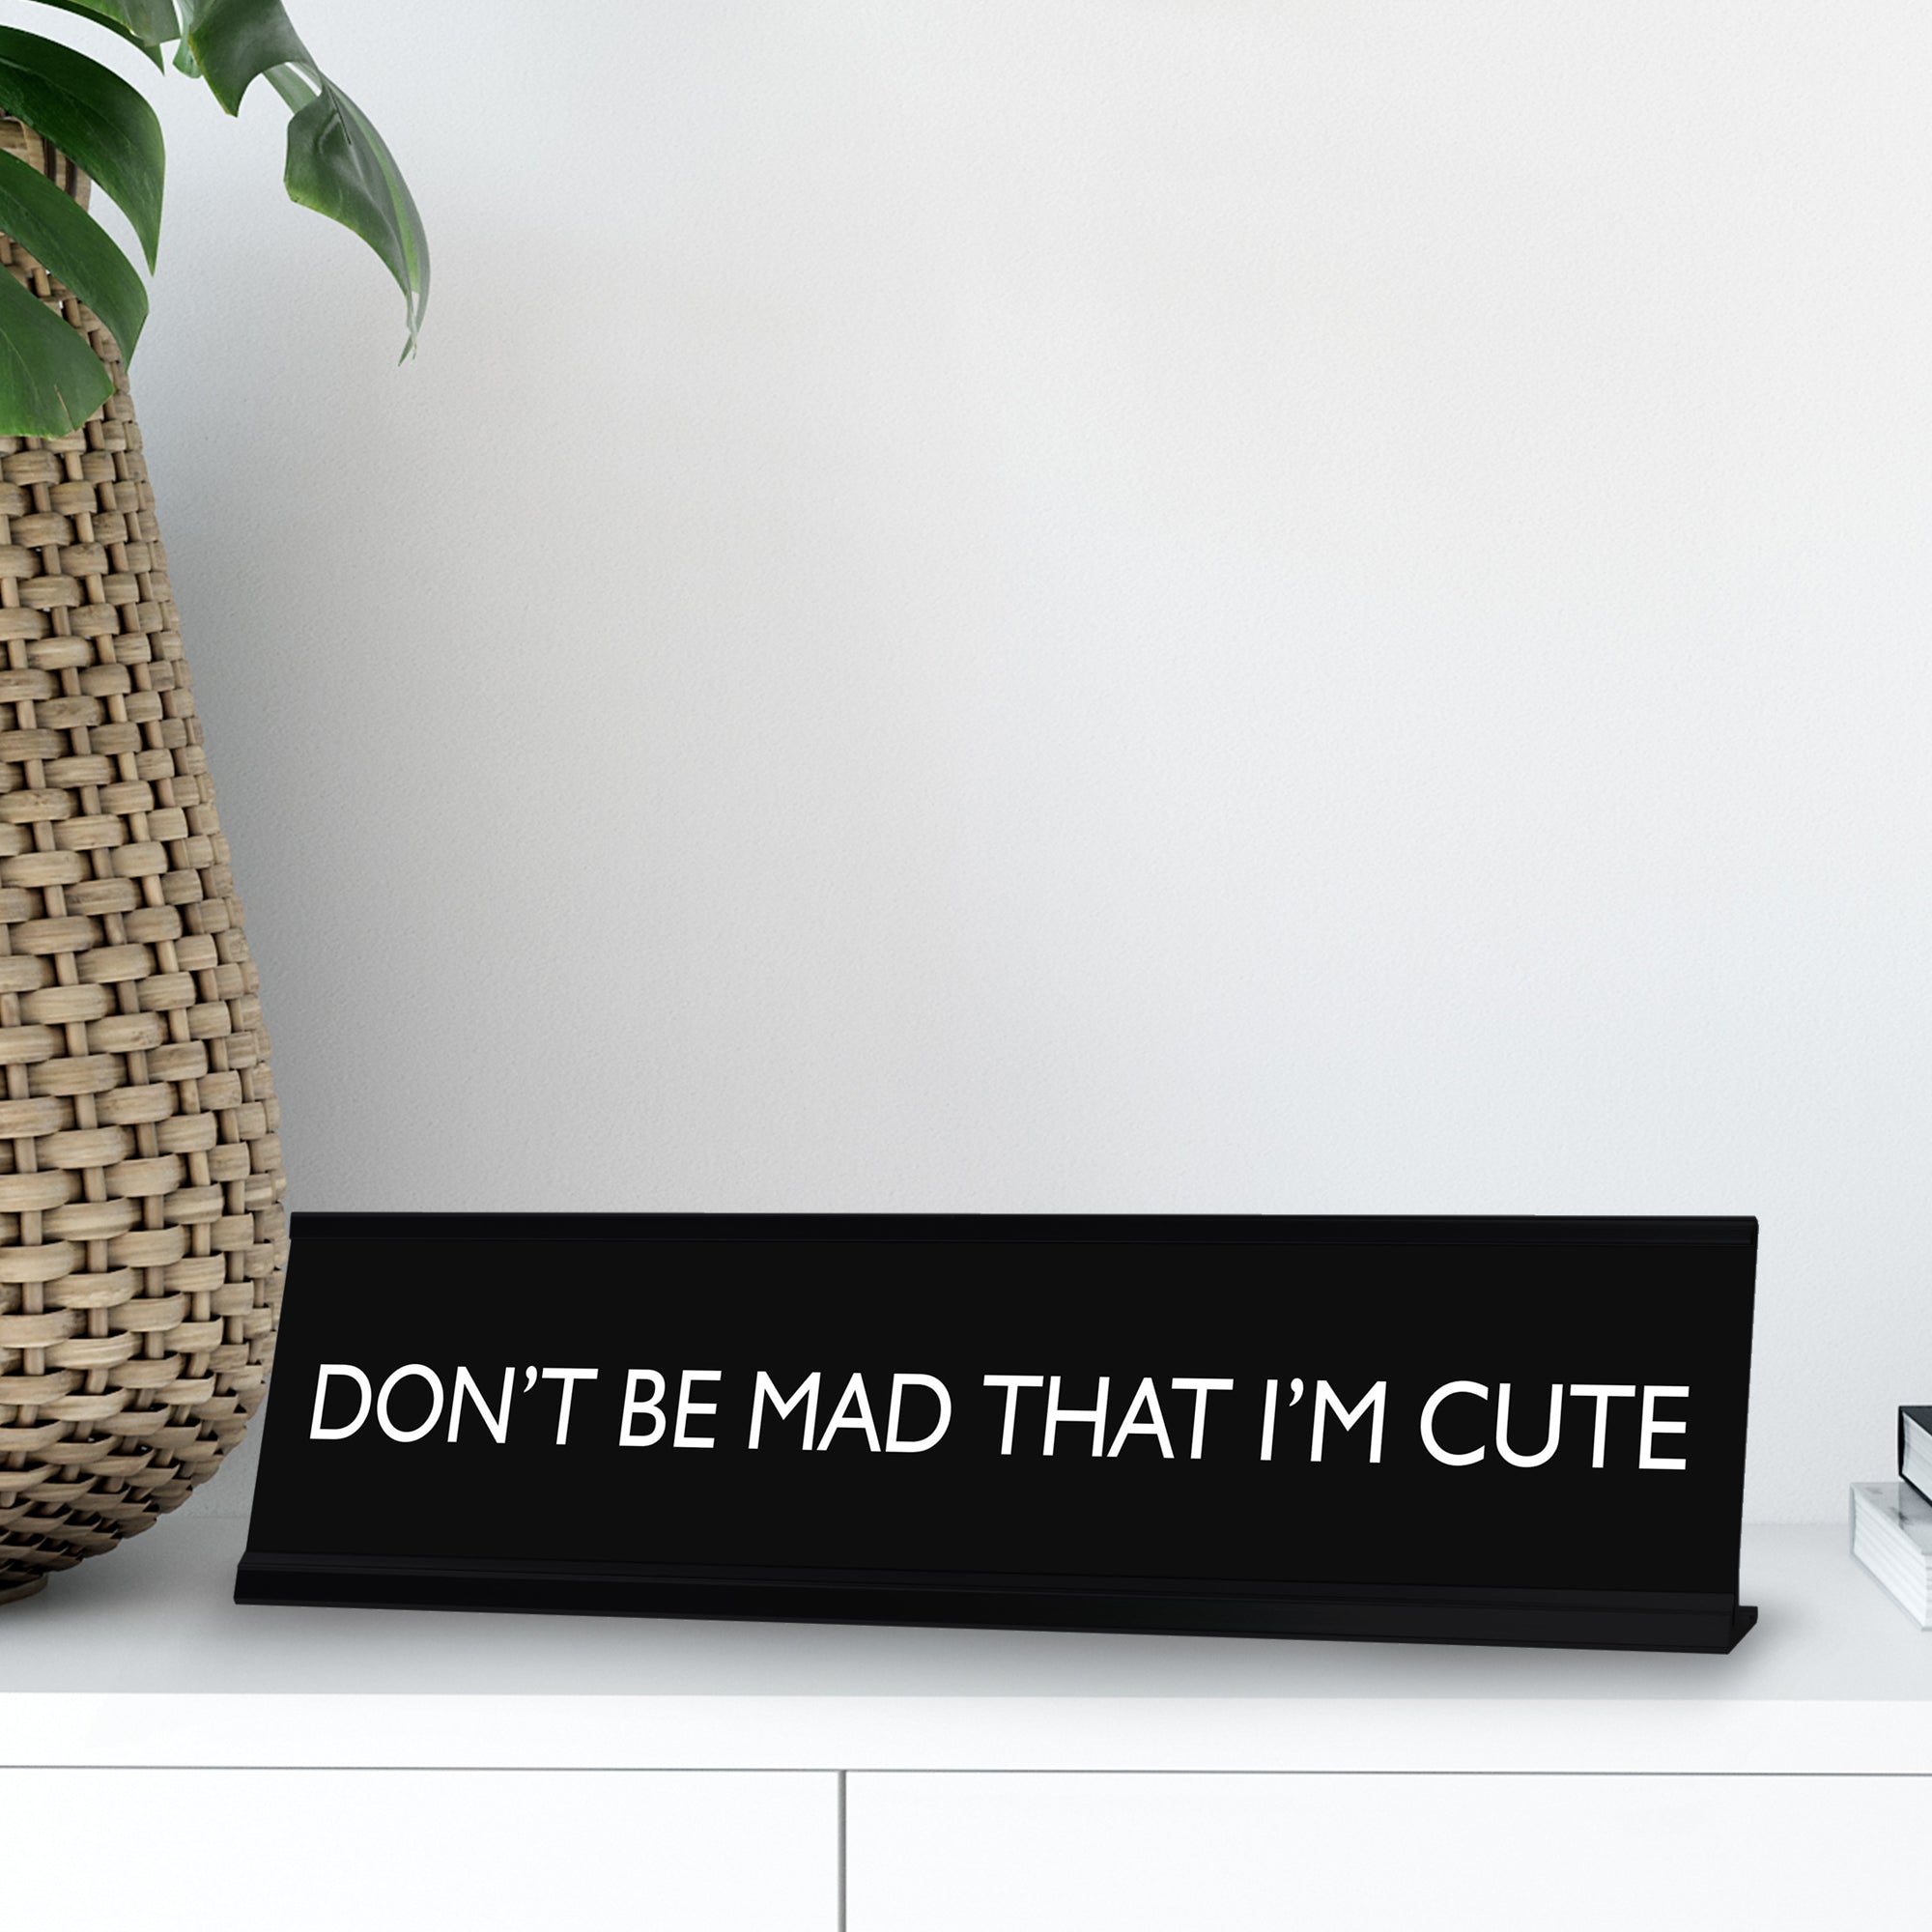 DON'T BE MAD THAT I'M CUTE Novelty Desk Sign